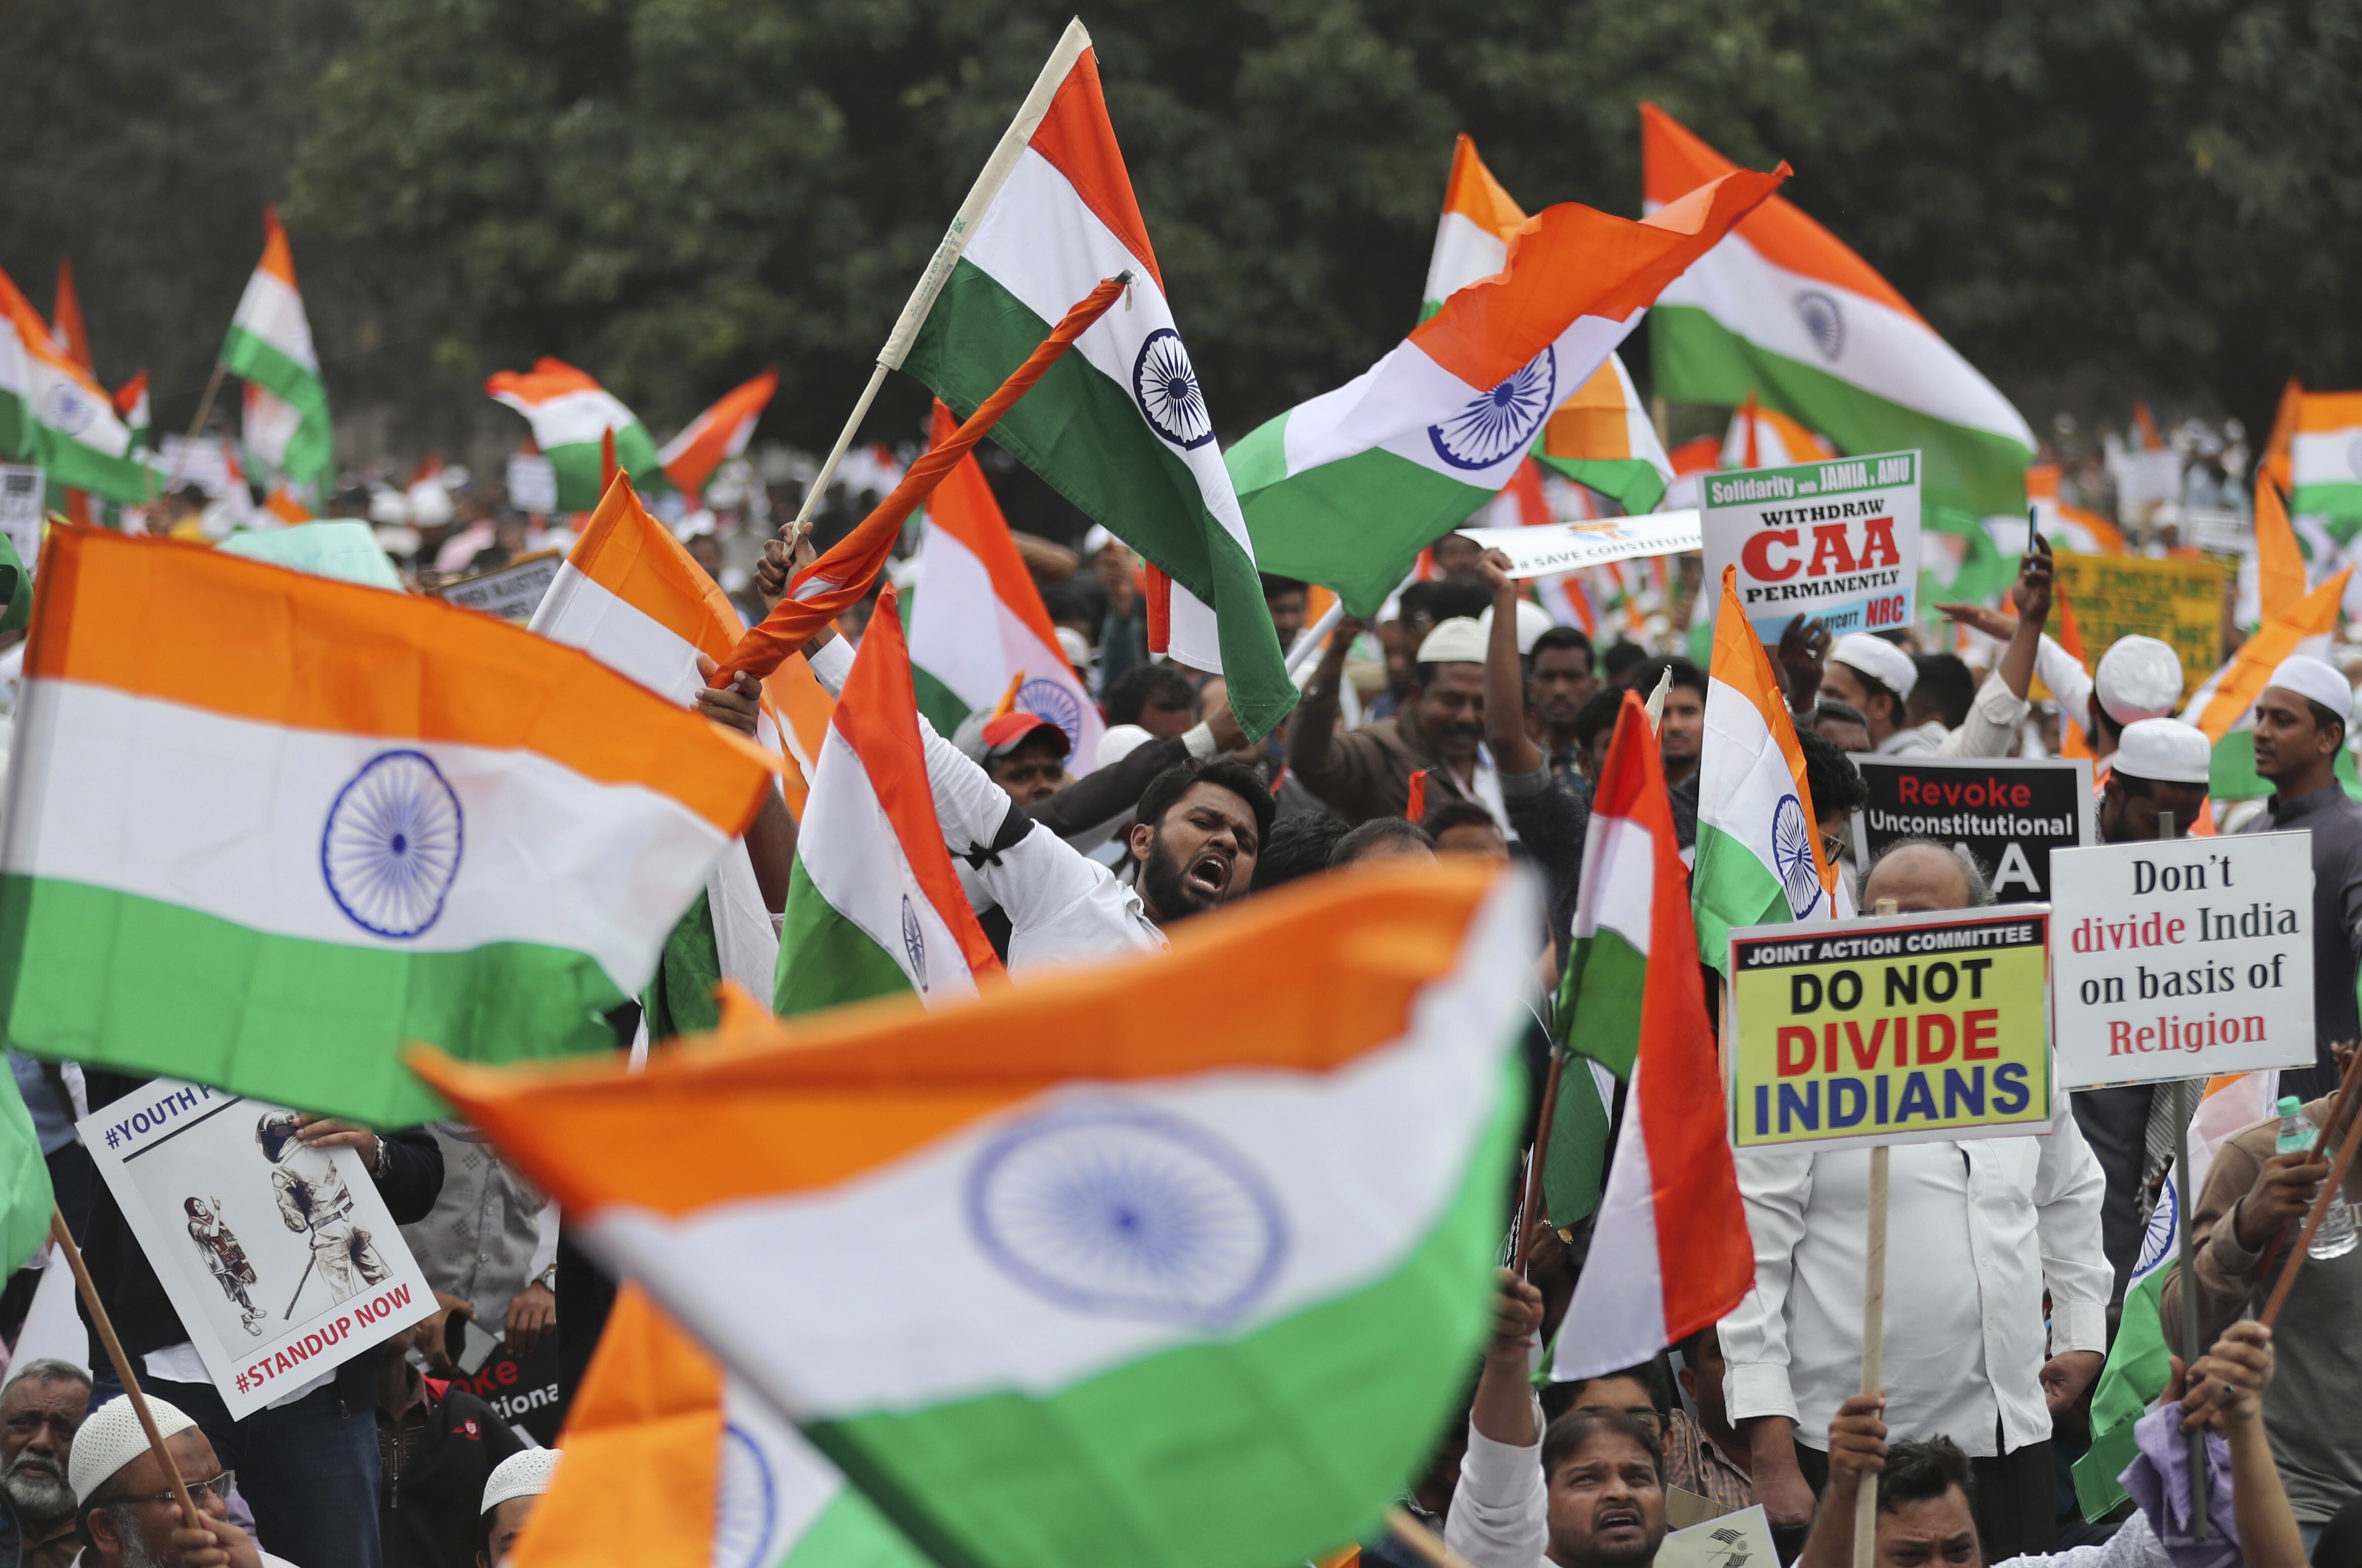 Indians hold national flags and placards during a protest against a 2019 citizenship law introduced by the BJP government that fast-tracked citizenship for refugees of other religions but not Muslims. Photo: AP